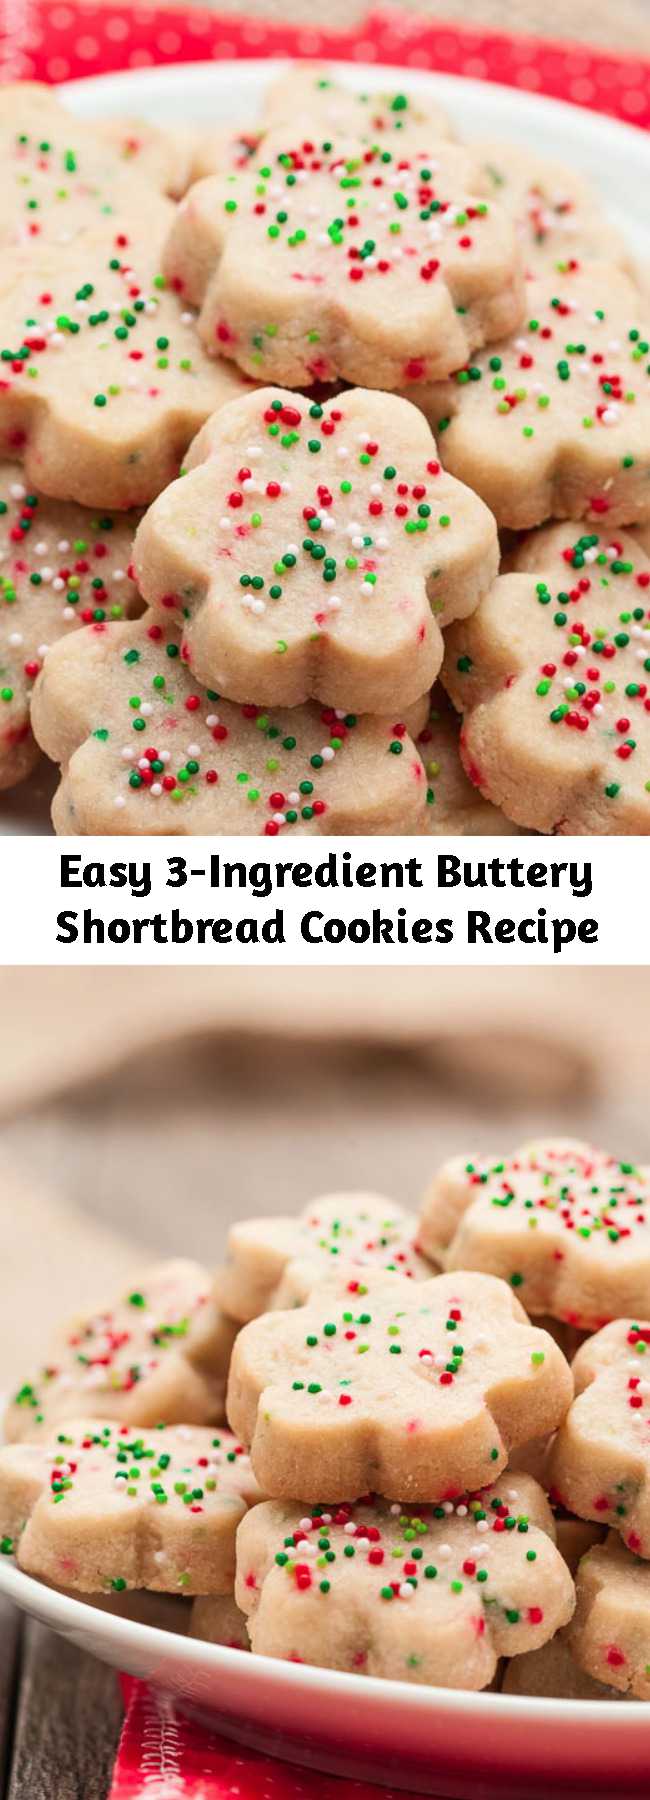 Easy 3-Ingredient Buttery Shortbread Cookies Recipe - These buttery shortbread cookies are simply divine. They are melt-in-your-mouth amazing, bursting with the goodness of butter, and easily dressed up or down. Make them, gift them, freeze them.